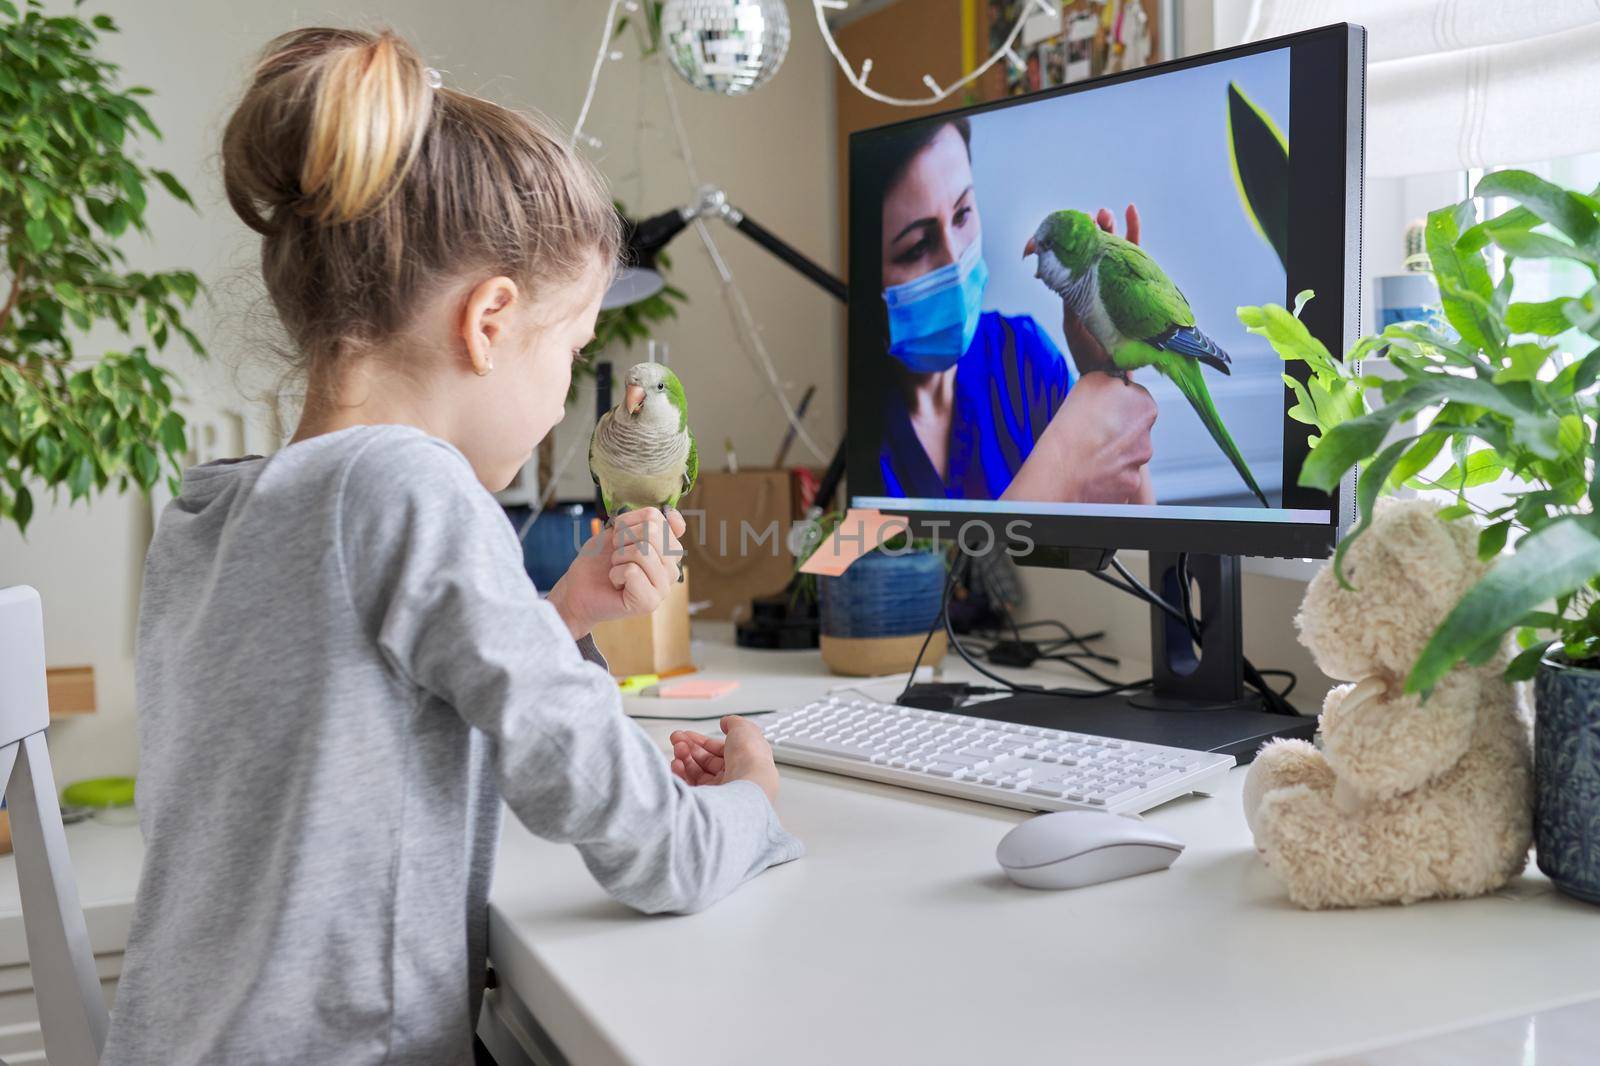 Girl and pet green parrot together at home, child watches video on computer by VH-studio